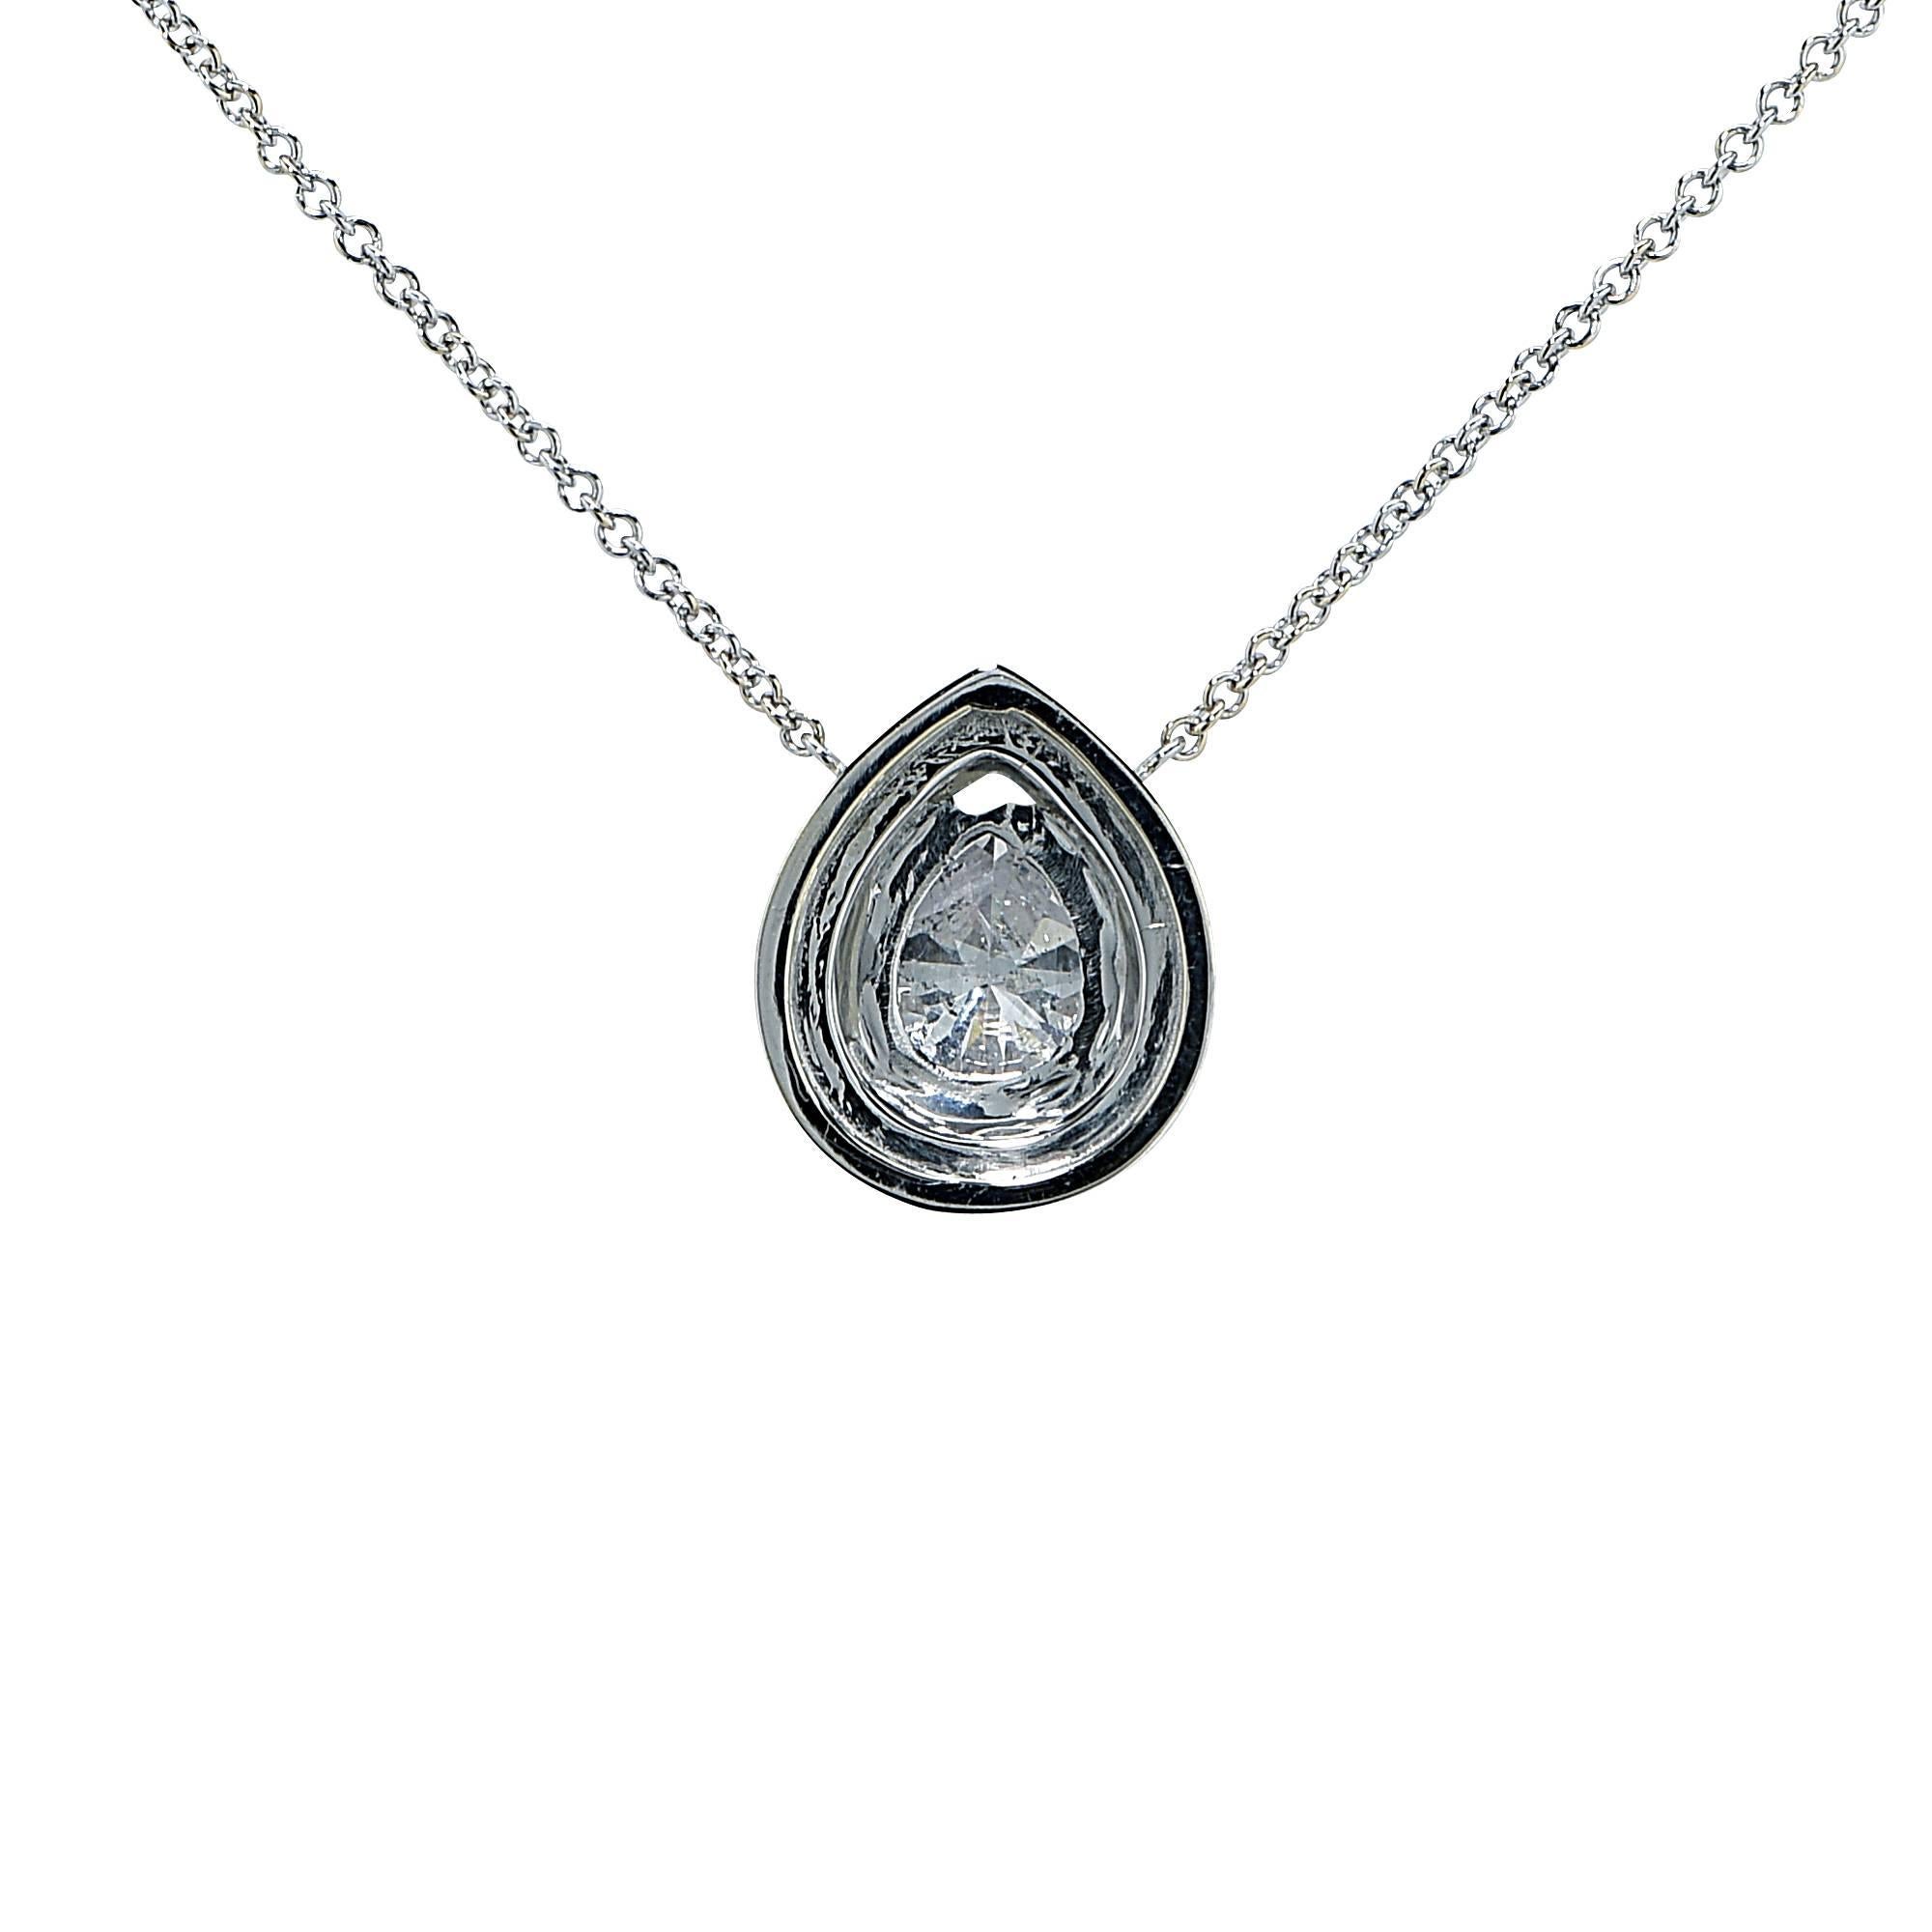 18k white gold necklace featuring a 1.12ct pear shape cut diamond G color SI3 clarity accented by 47 round brilliant cut diamonds weighing .32cts total, G color VS clarity.

It is stamped and/or tested as 18k gold.
The metal weight is 3.79